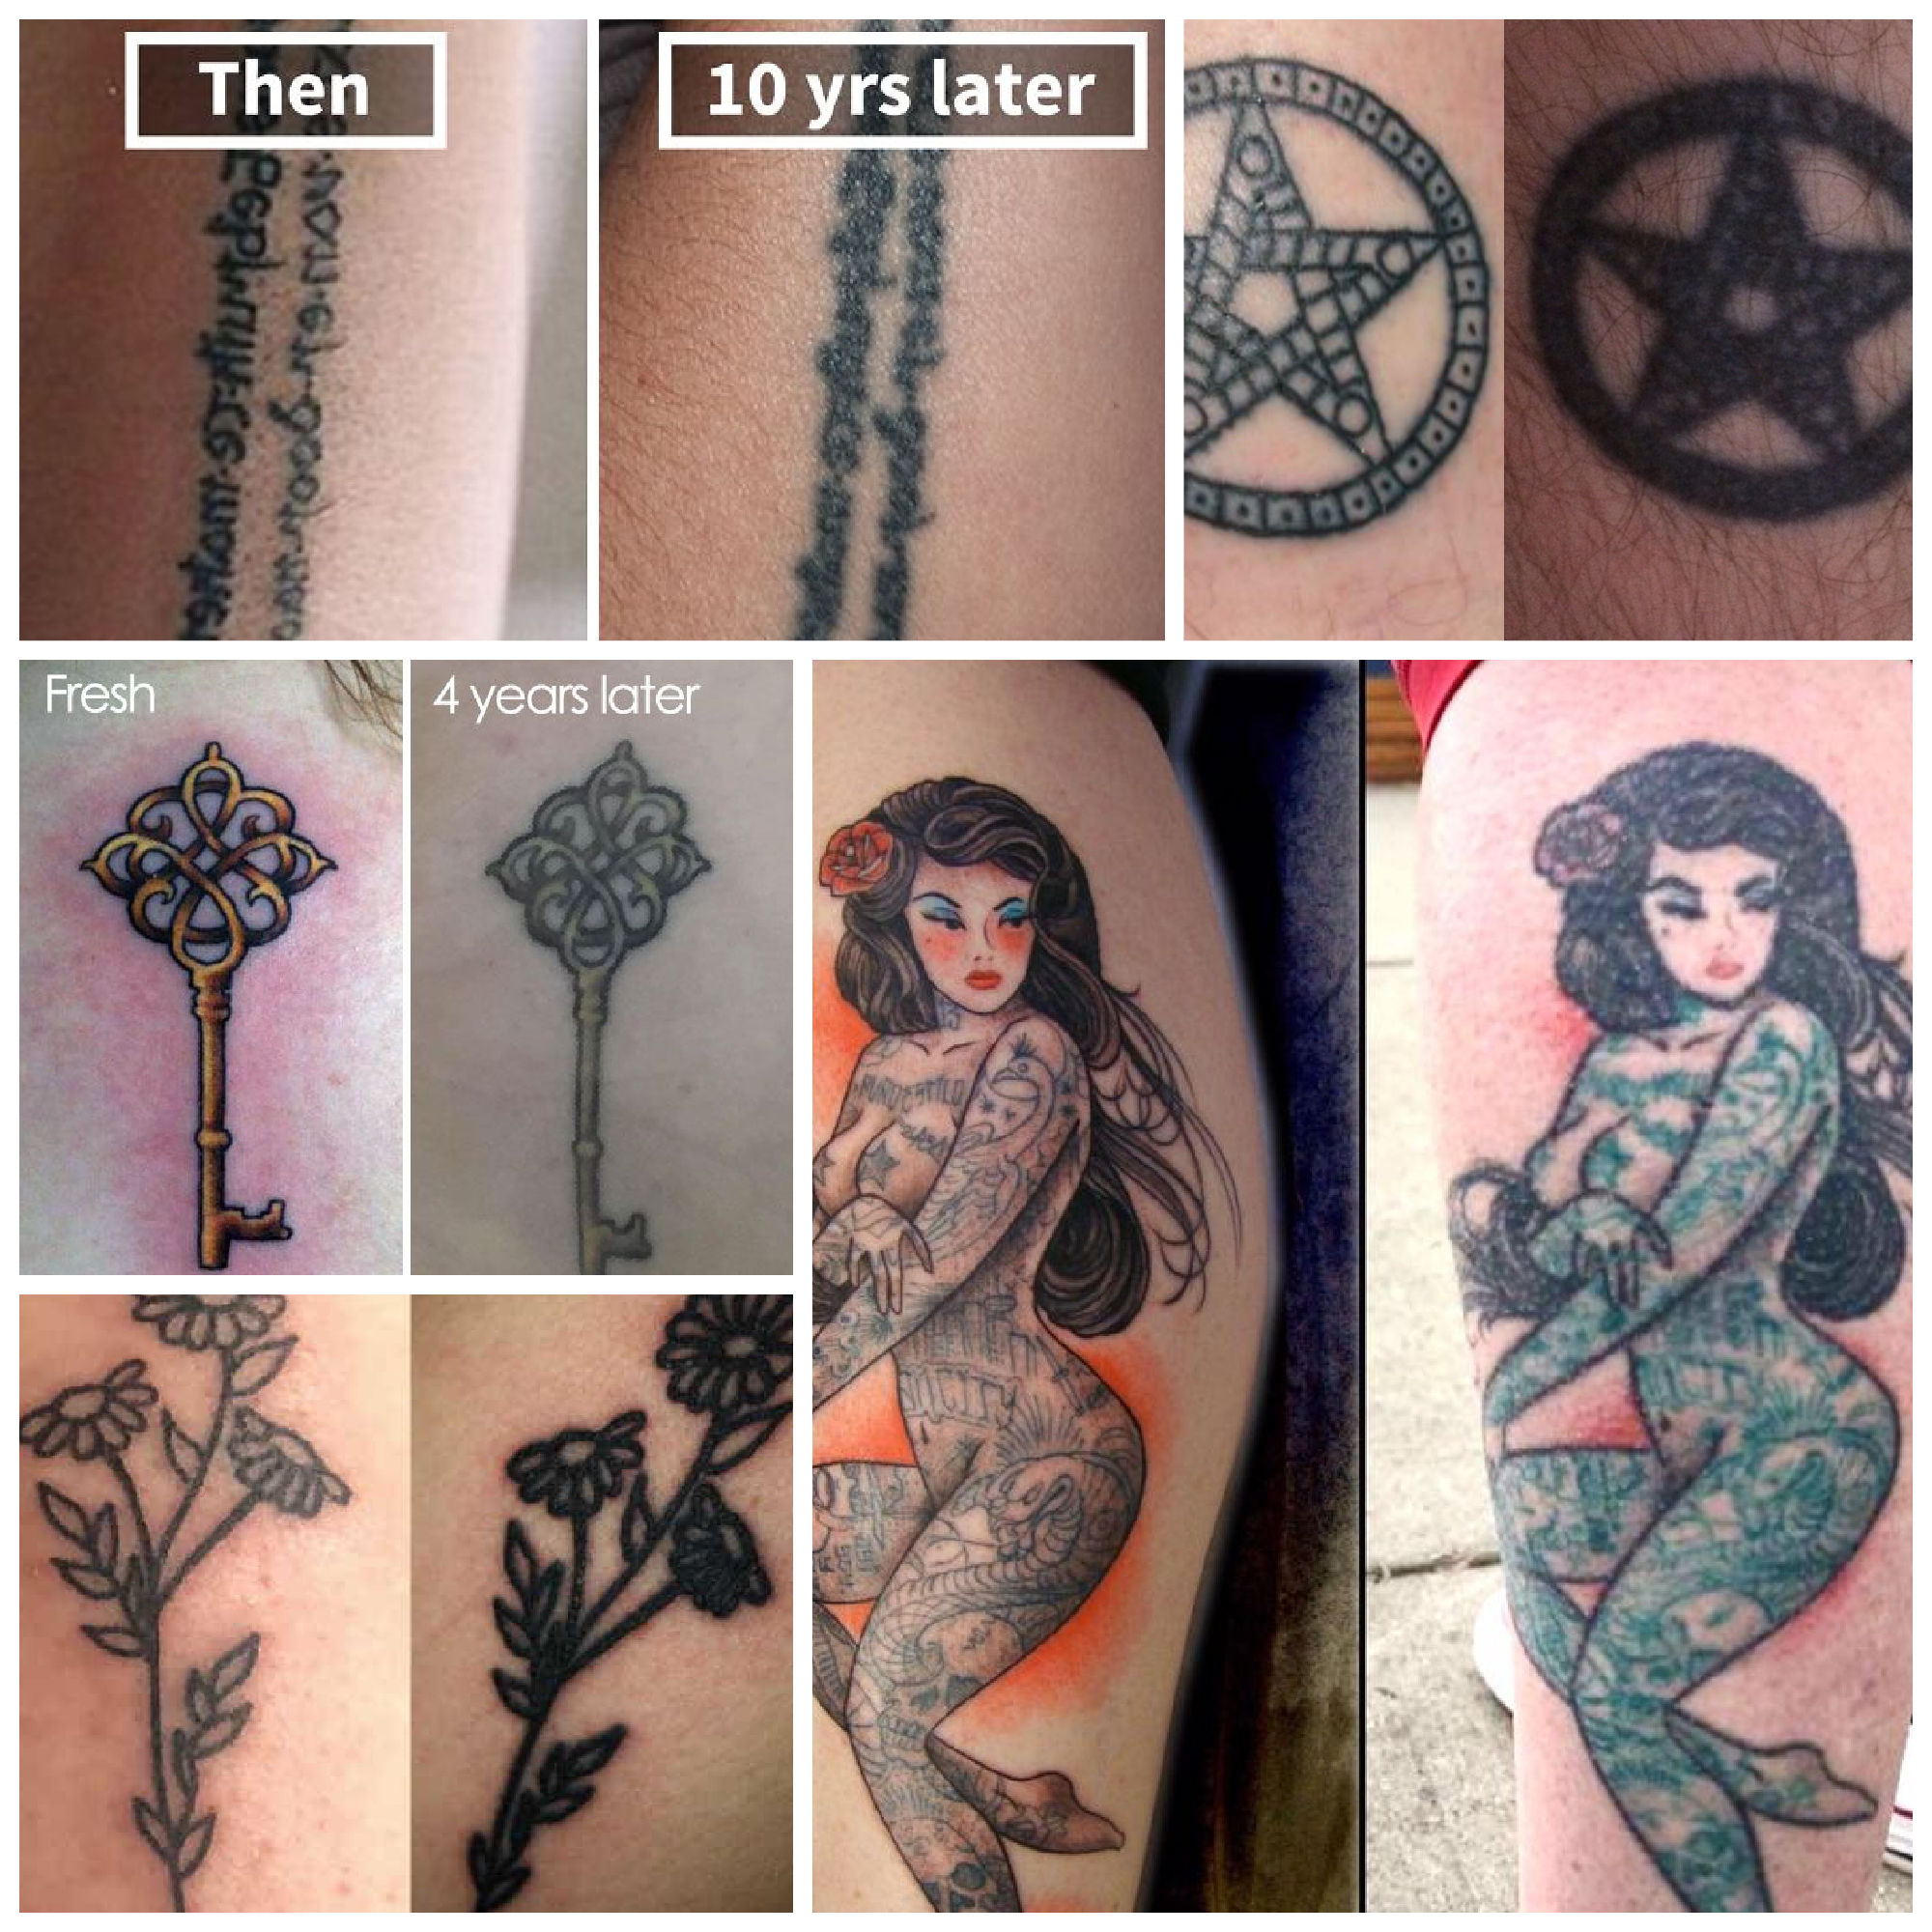 Things to Consider When Choosing Your Tattoo | Arick Reese Art & Tattoos